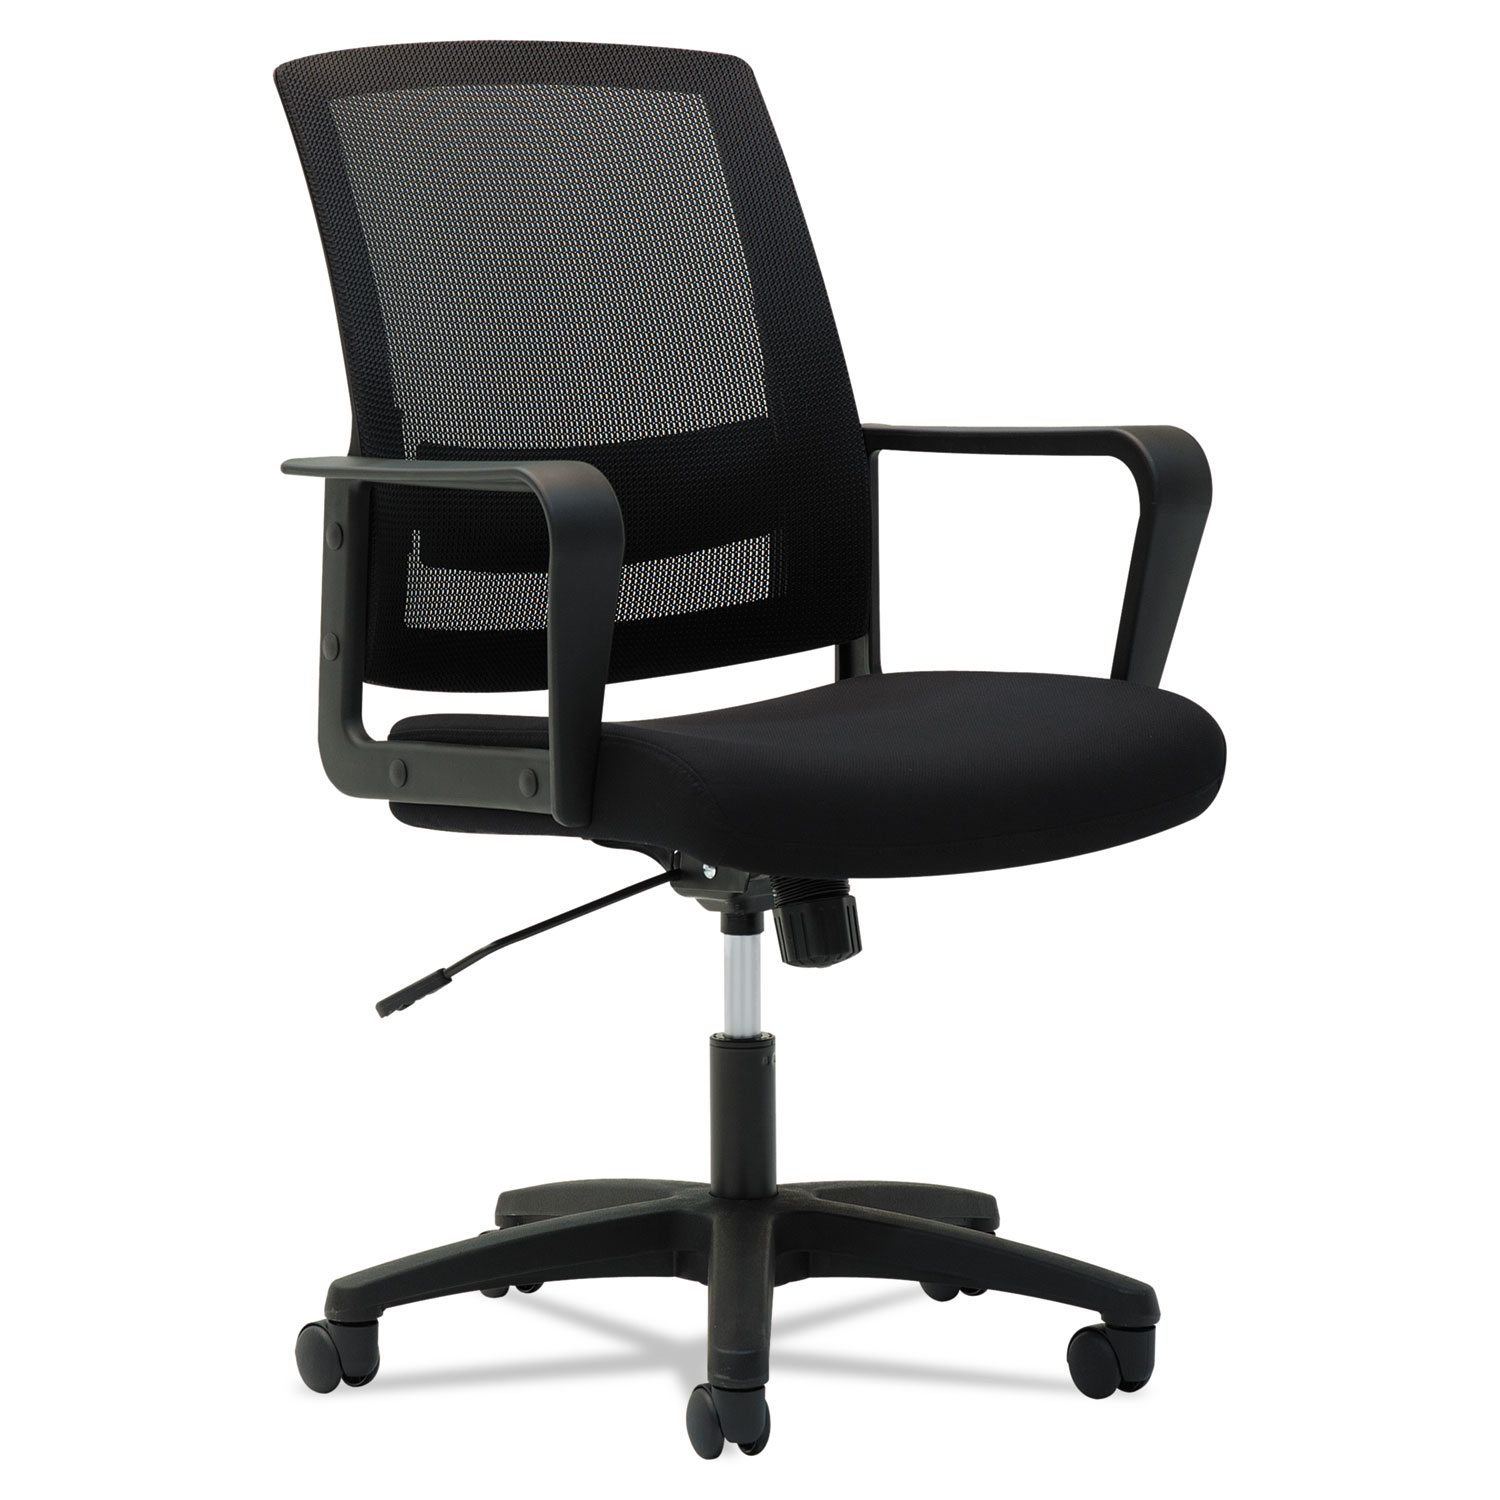 Mesh Mid-Back Chair, Supports up to 225 lbs., Black Seat/Black Back, Black Base